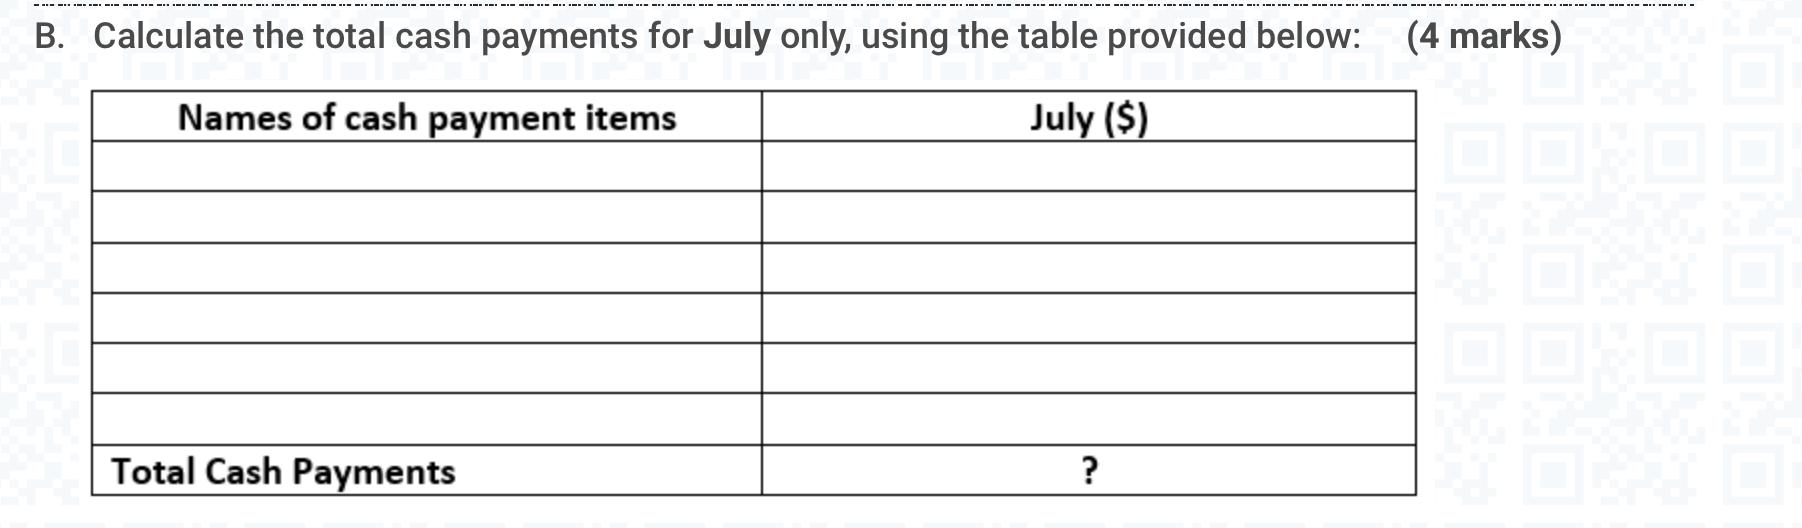 ----------------- B. Calculate the total cash payments for July only, using the table provided below: (4 marks) Names of cash